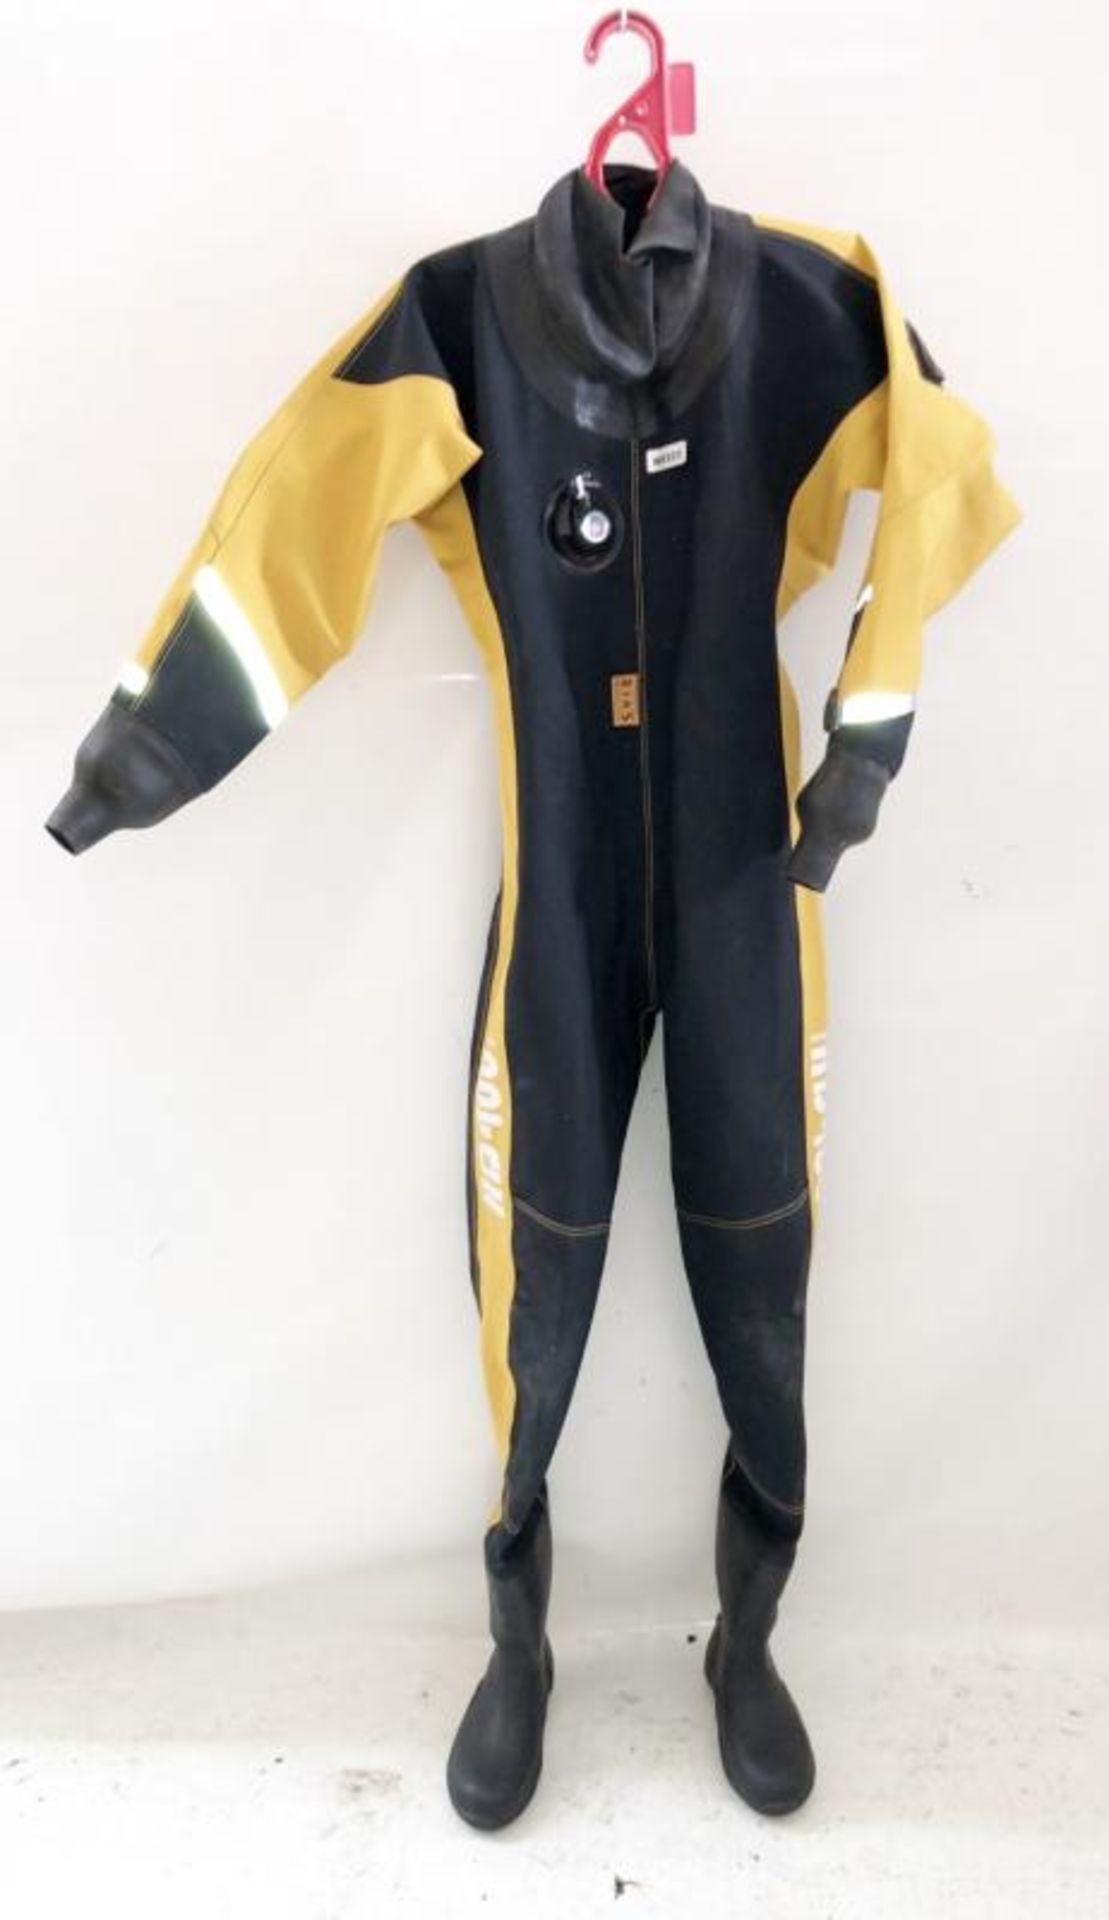 4 x Used Diving Drysuit's - Ref: NS332, NS333, NS343, NS344 - CL349 - Altrincham WA14 - Image 10 of 21